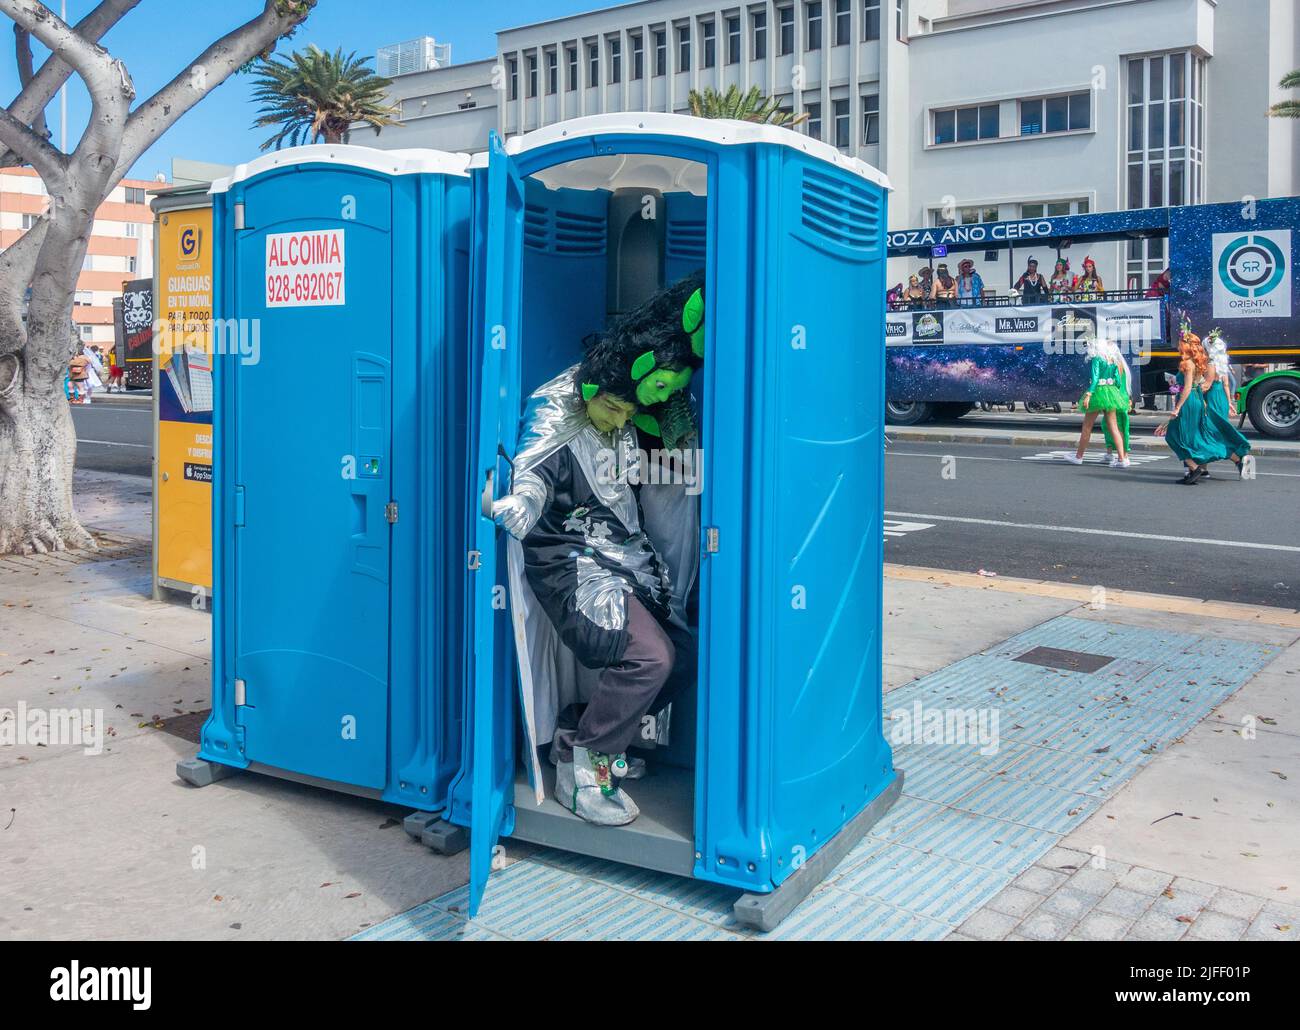 Las Palmas, Gran Canaria, Canary Islands, Spain. 2nd July, 2022. Thousand of people in fancy dress enjoying the Las Palmas Carnival street parade in blazing sunshine. PICTURED: A tight squeeze in the portable toilet for a man wearing a two head hat. Credit: Alan Dawson/ Alamy Live News. Stock Photo